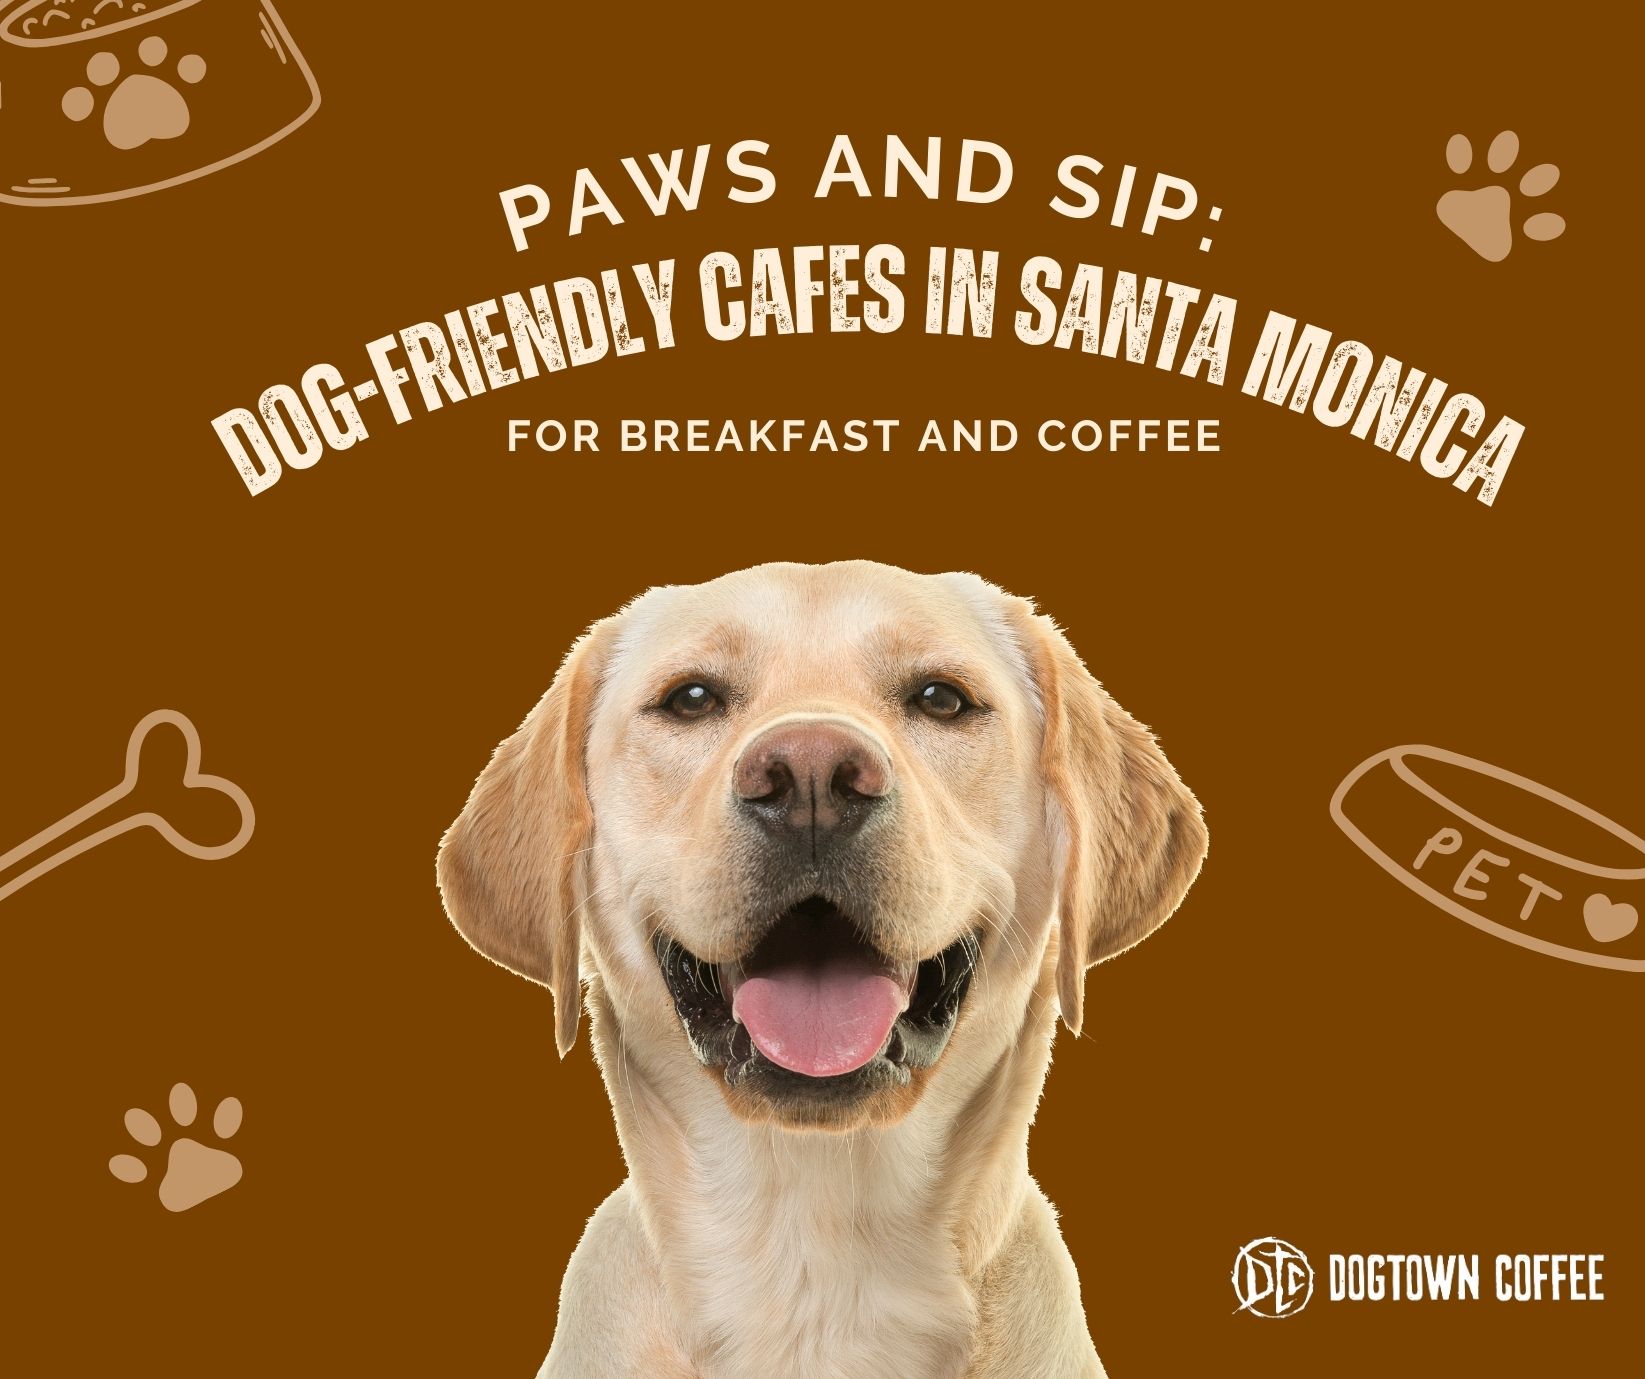 image-of-a-dog-blog-title-Paws-and-Sip-Dog-Friendly-Cafes-in-Santa-Monica-for-Breakfast-and-Coffee-Facebook-Post